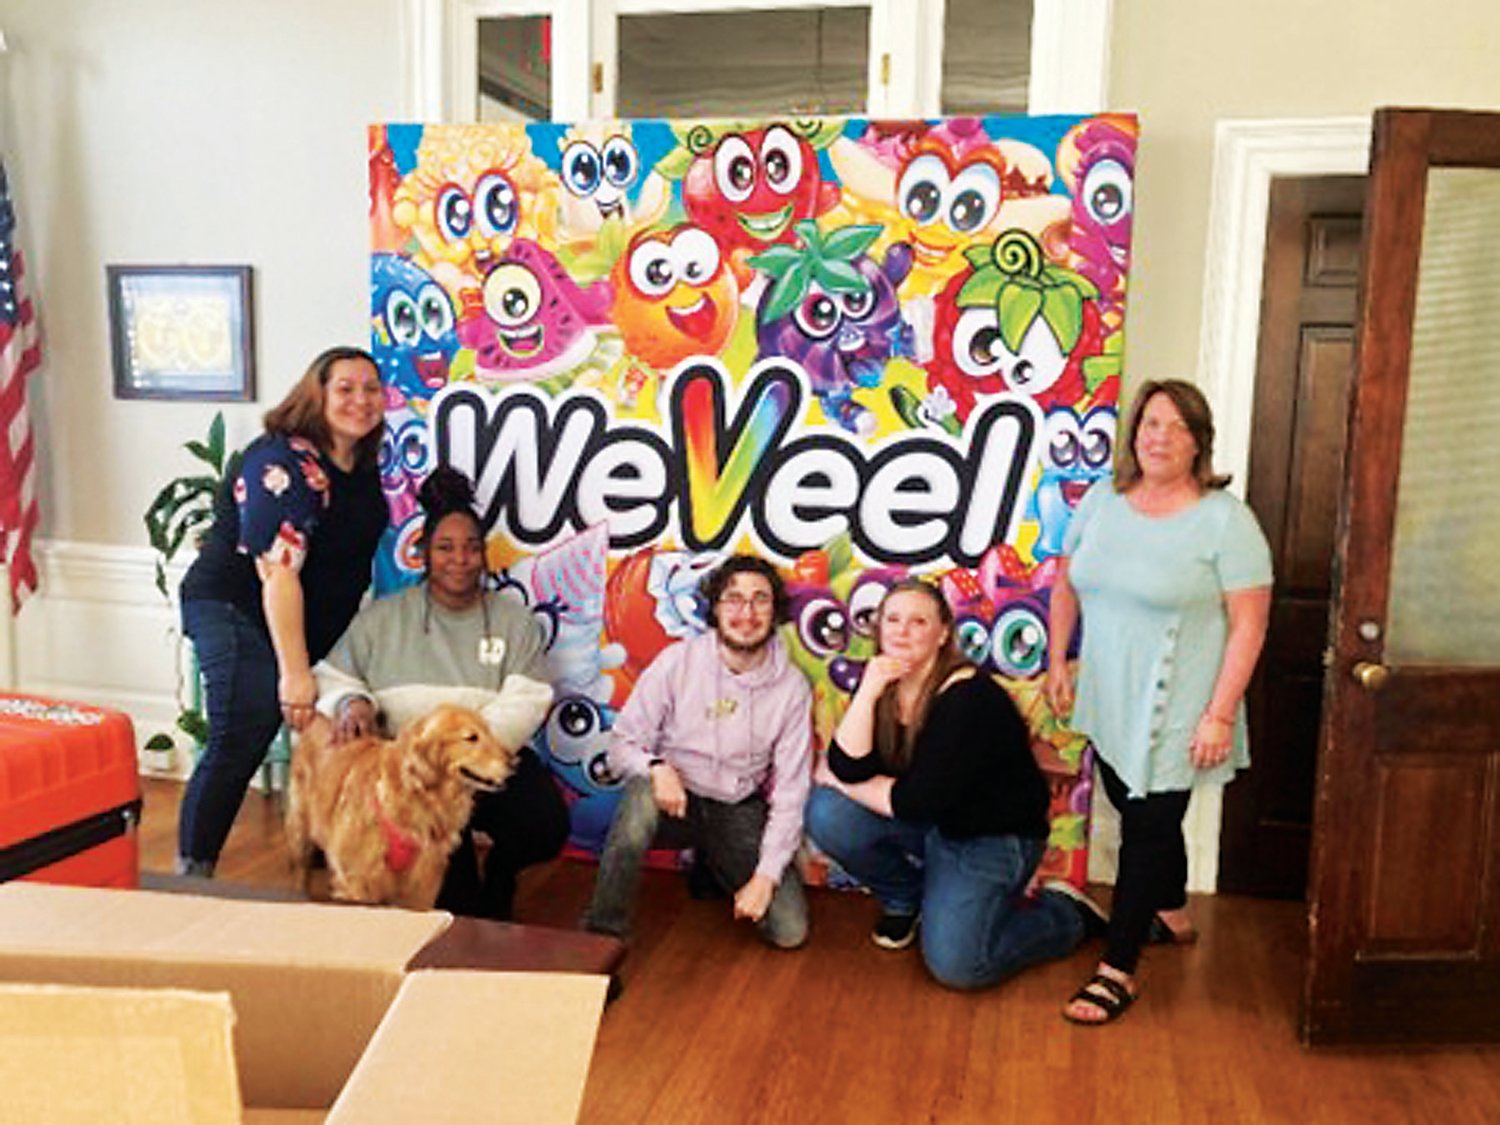 Some of the staff at WeVeel Toys & Stationery at their Morrisville Borough headquarters are, from left, Senior Accounts Manager Sharon Ward, Senior Operations Specialist Dymonique McCleese and office dog Daisy, Junior Operations Specialist Brandon Holzhauer, Creative Director Amy Houser and Accounts Manager Vicki Petroski.